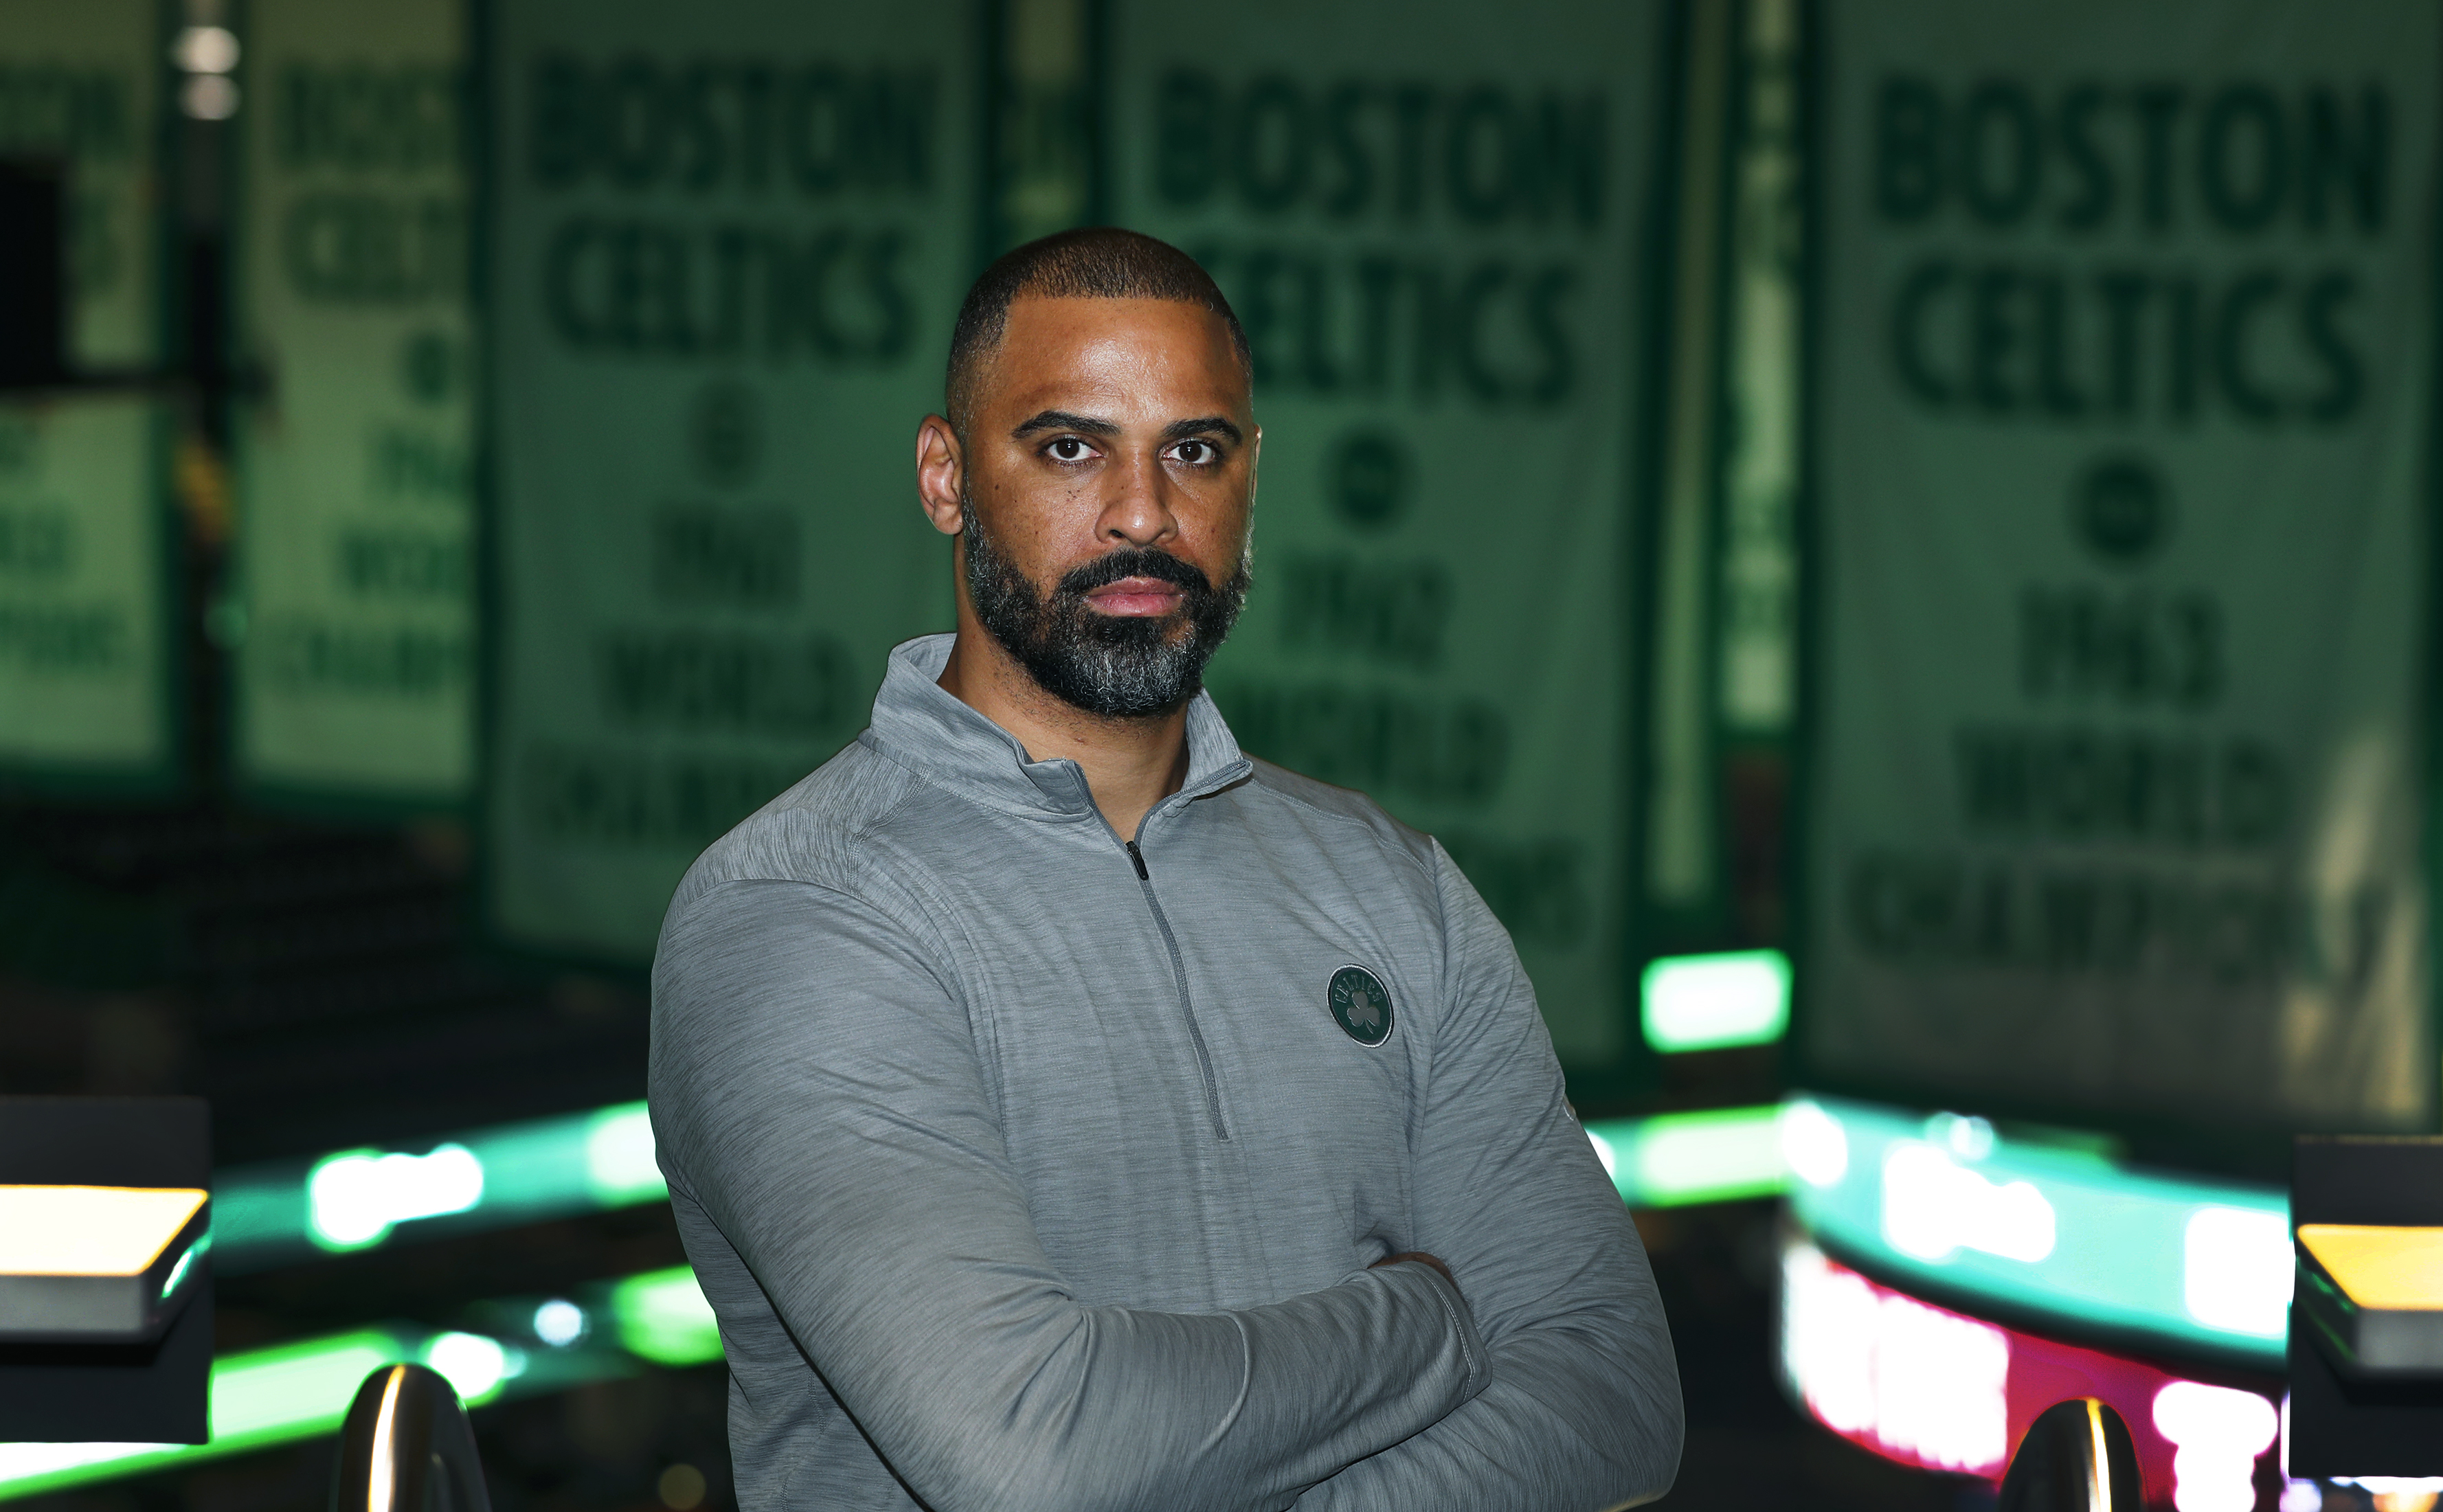  If These Walls Could Talk: Boston Celtics: Stories